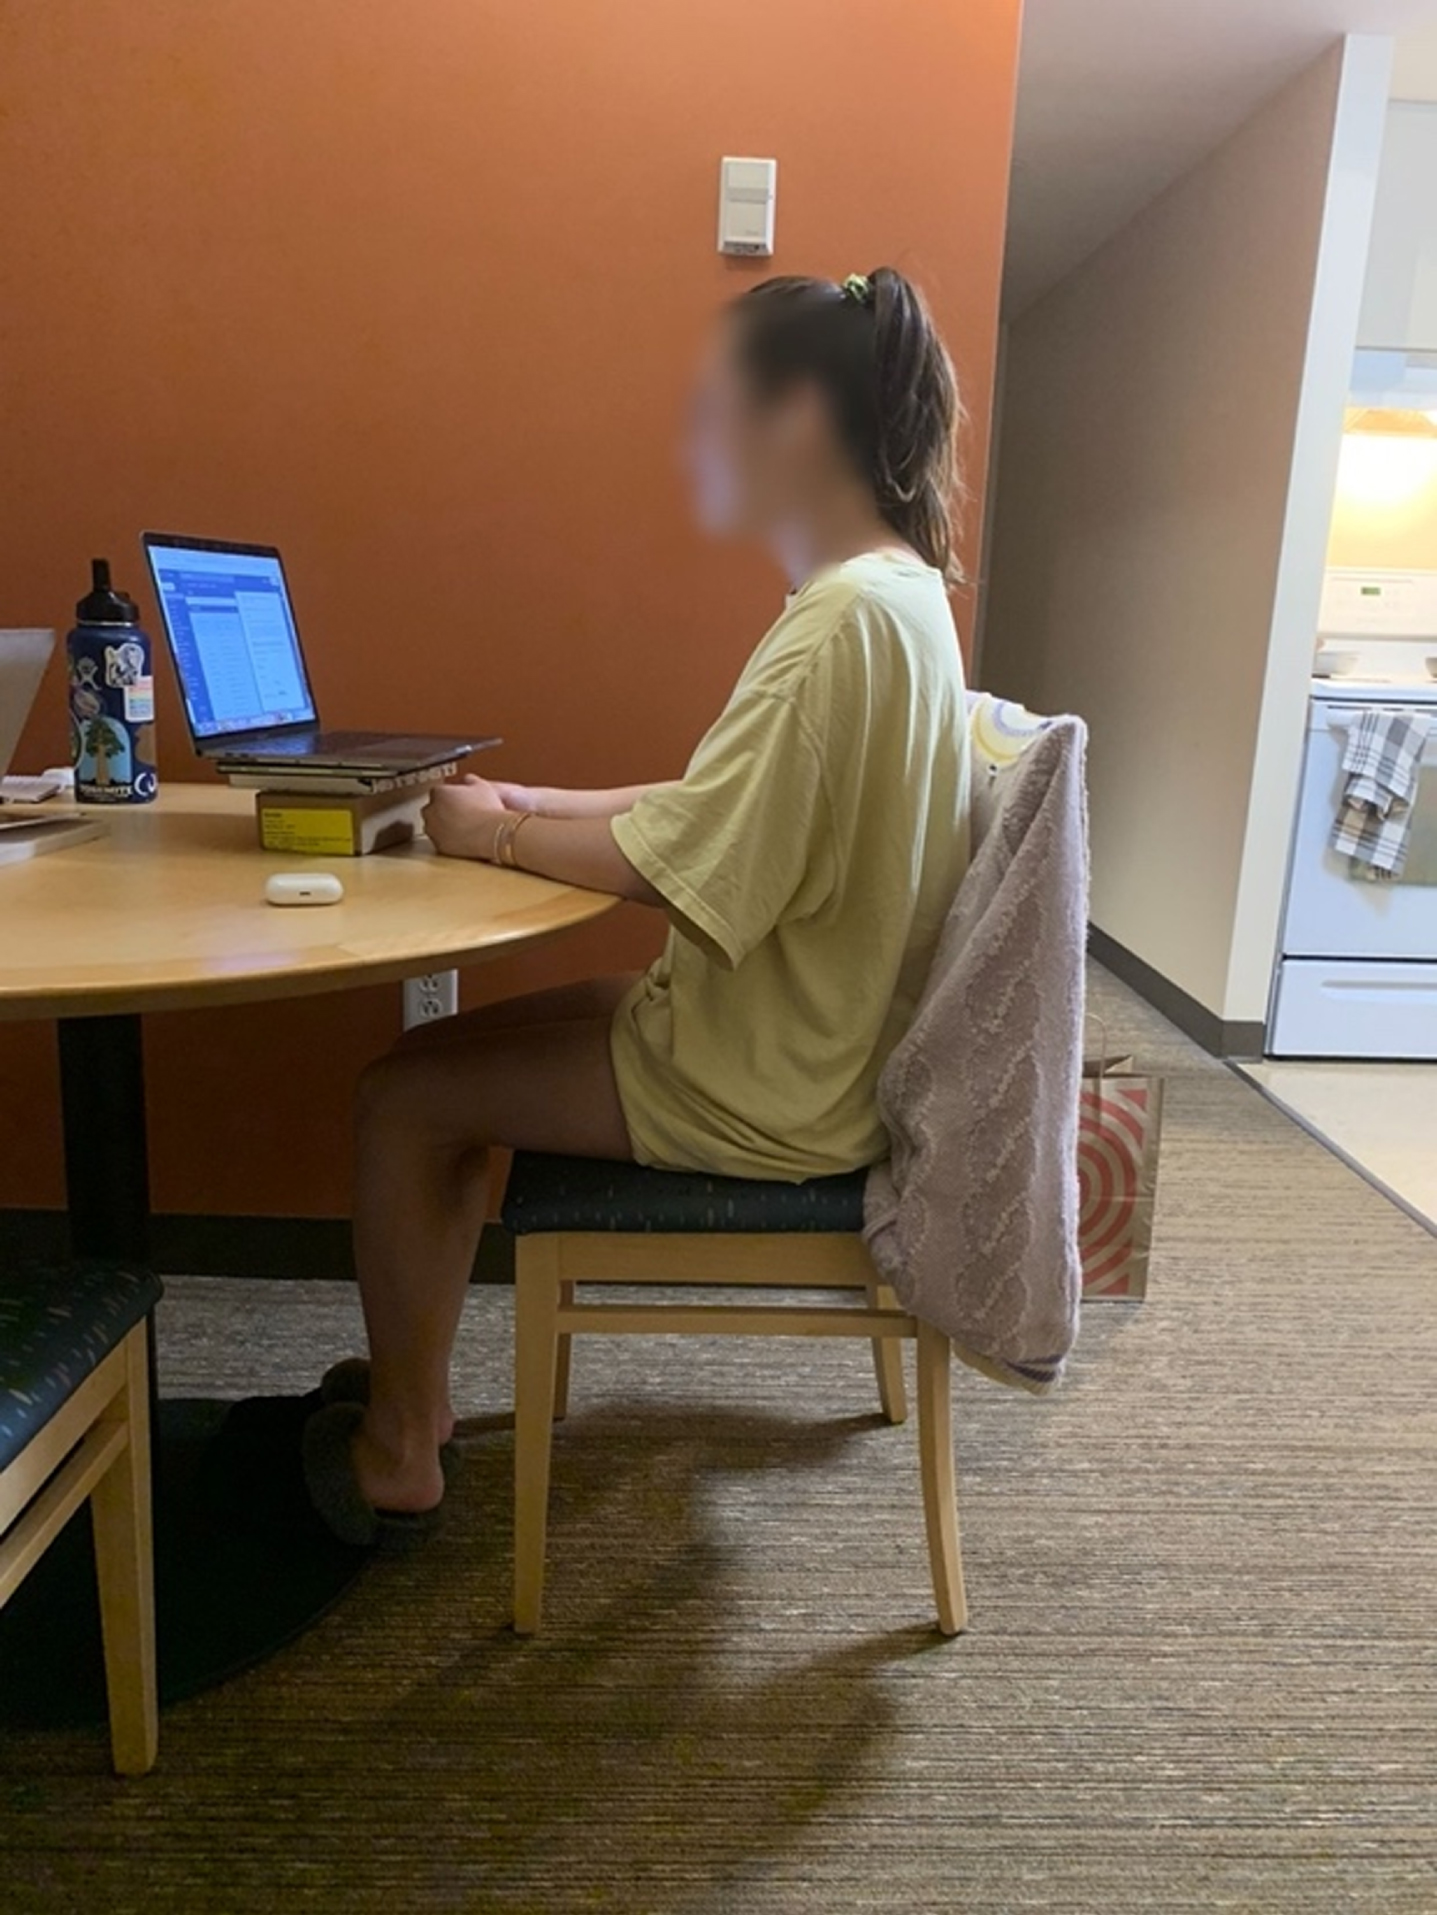 Chair without lumbar support. An example of a participant who made an improvement by raising her laptop and an ineffective change by selecting a different chair without lumbar support.